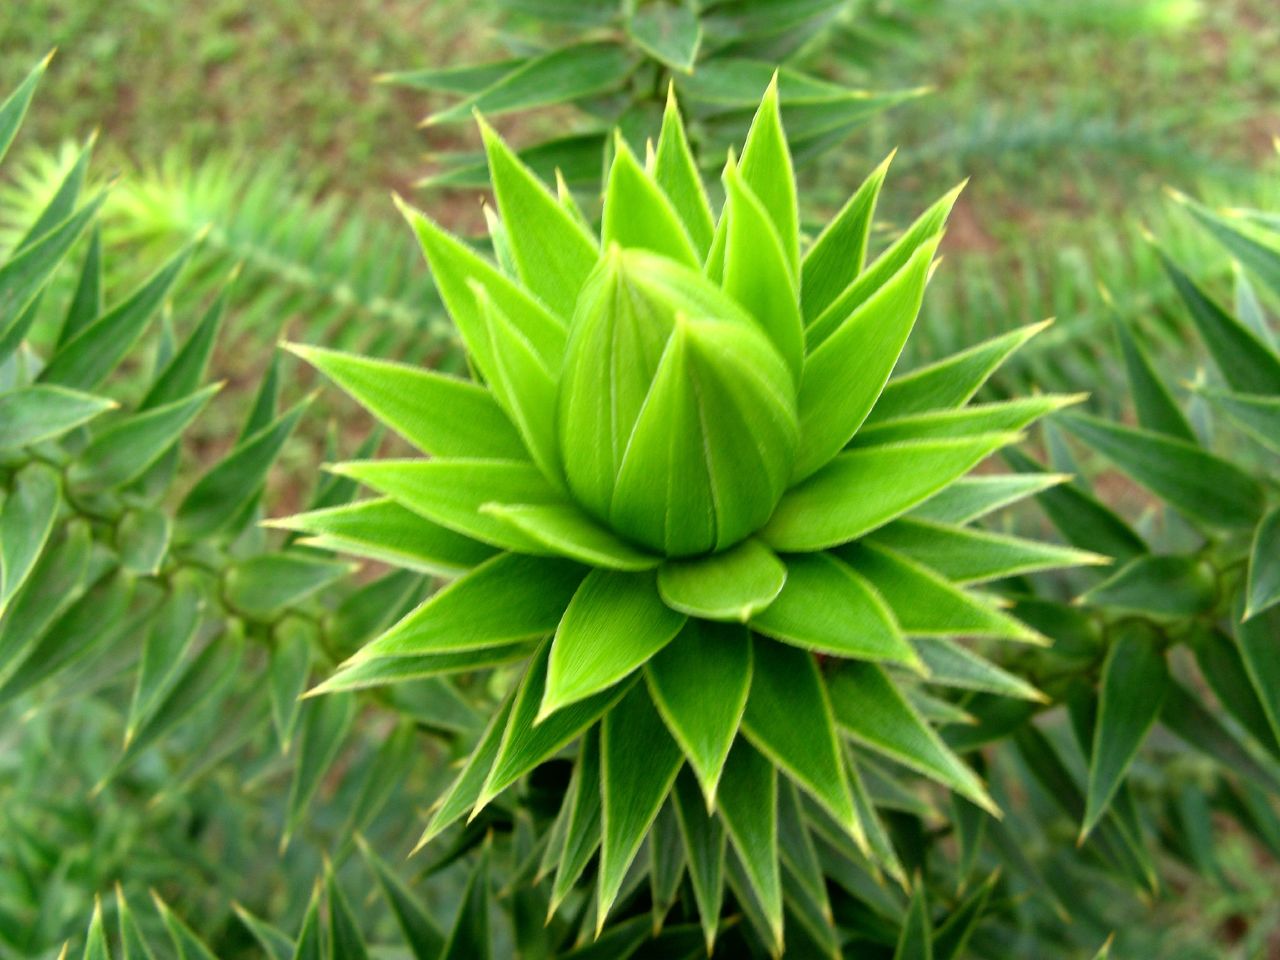 close up view of an abstract green plant